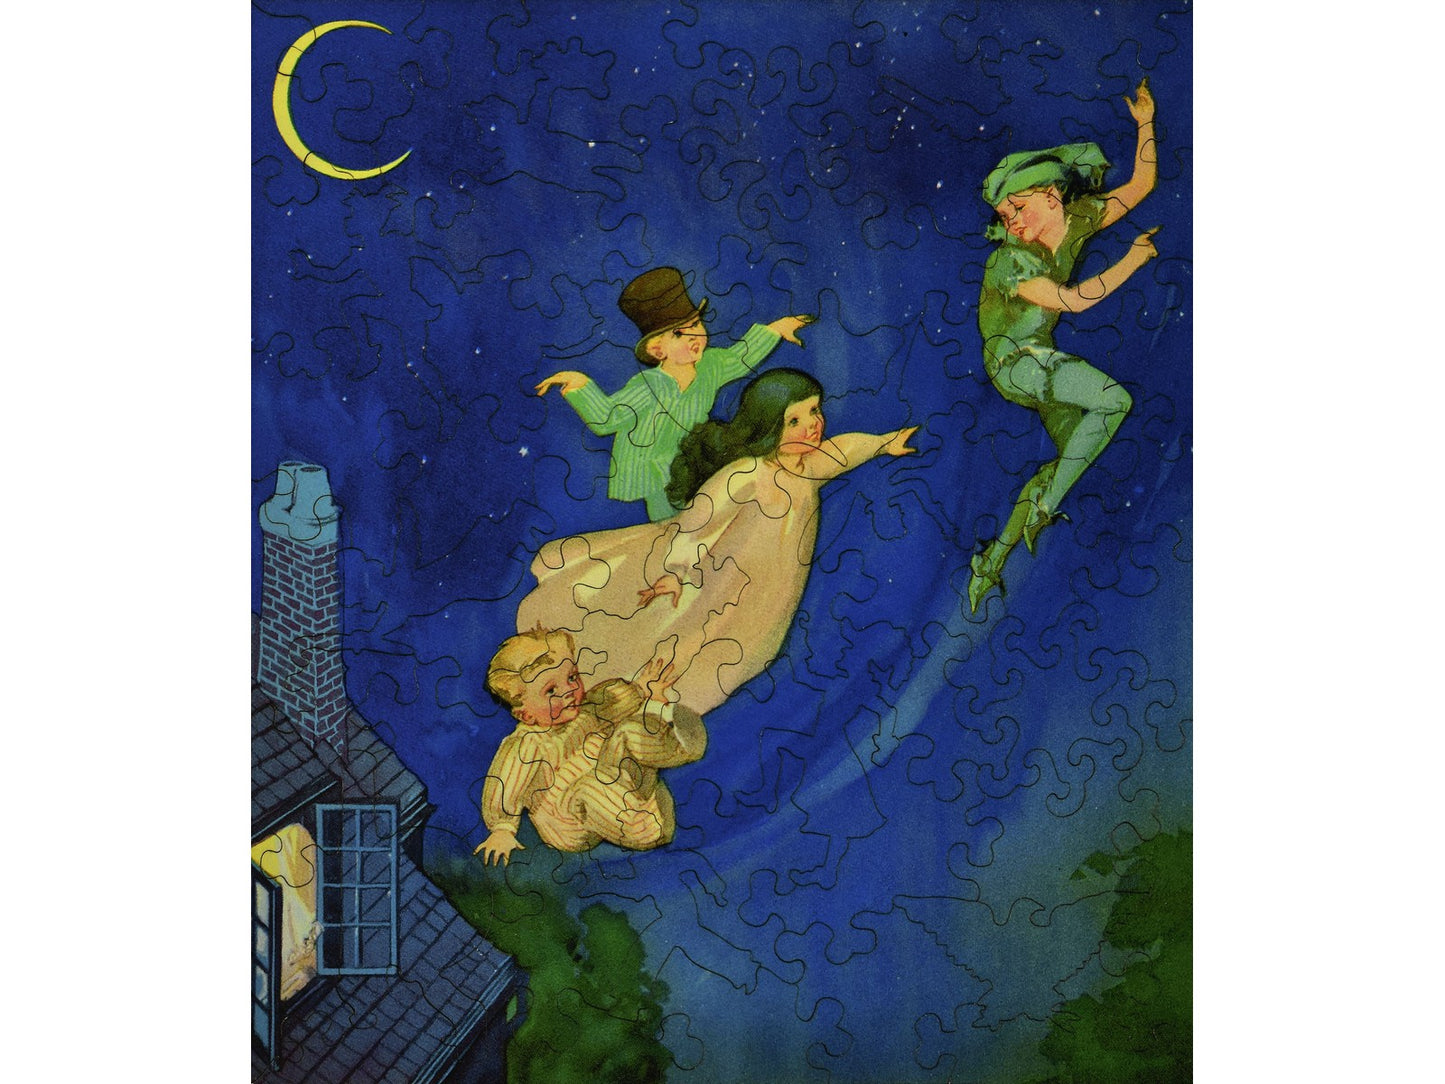 The front of the puzzle, Peter Pan Flying, which shows Peter Pan flying through the night sky with Wendy, John, and Michael Darling.